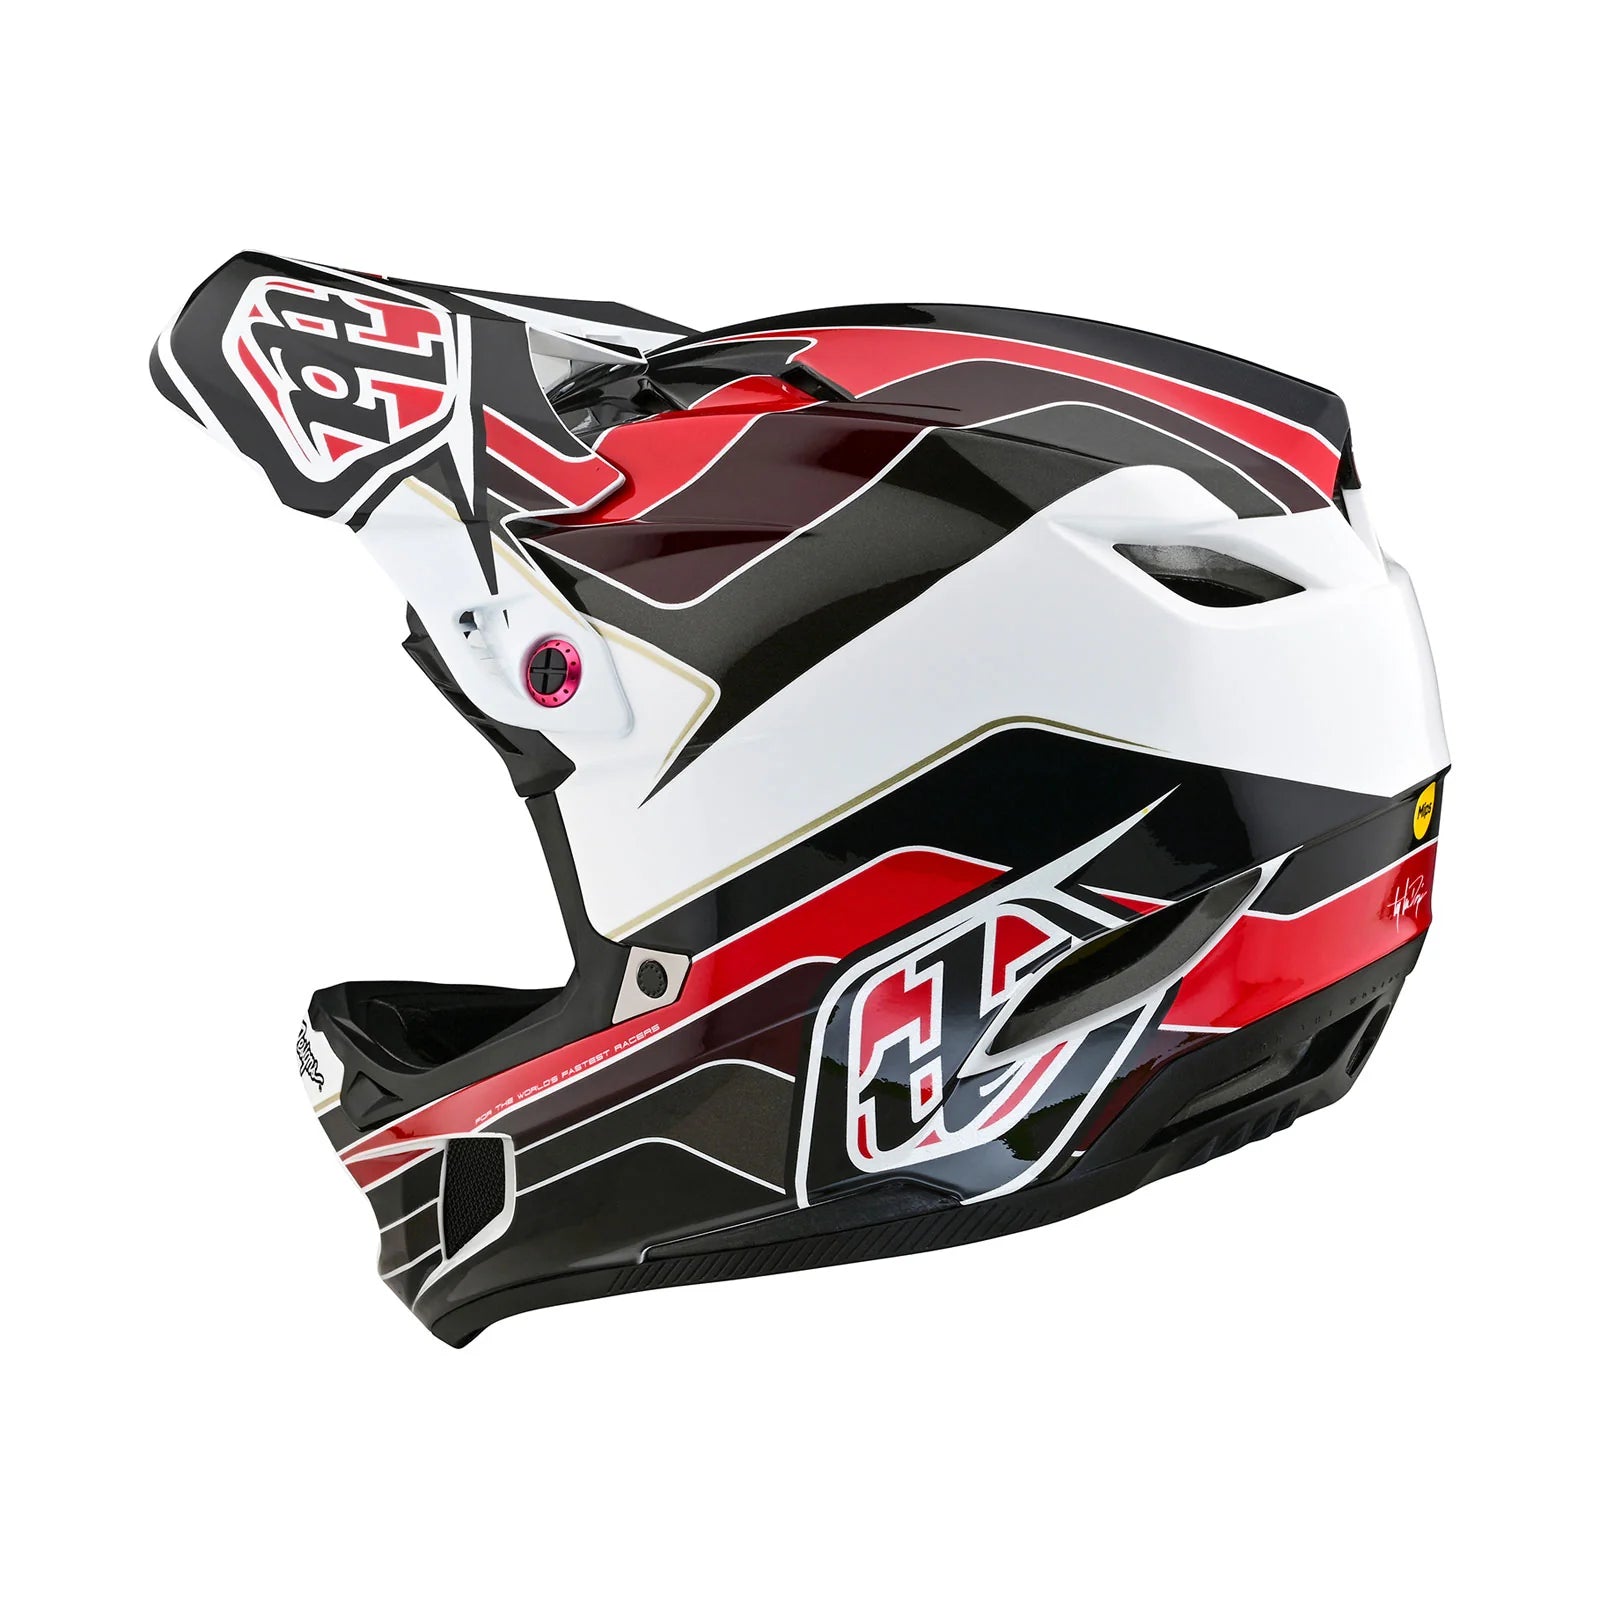 A TLD D4 AS Polyacrylite Helmet W/MIPS Block Charcoal / Red with a black and red design.